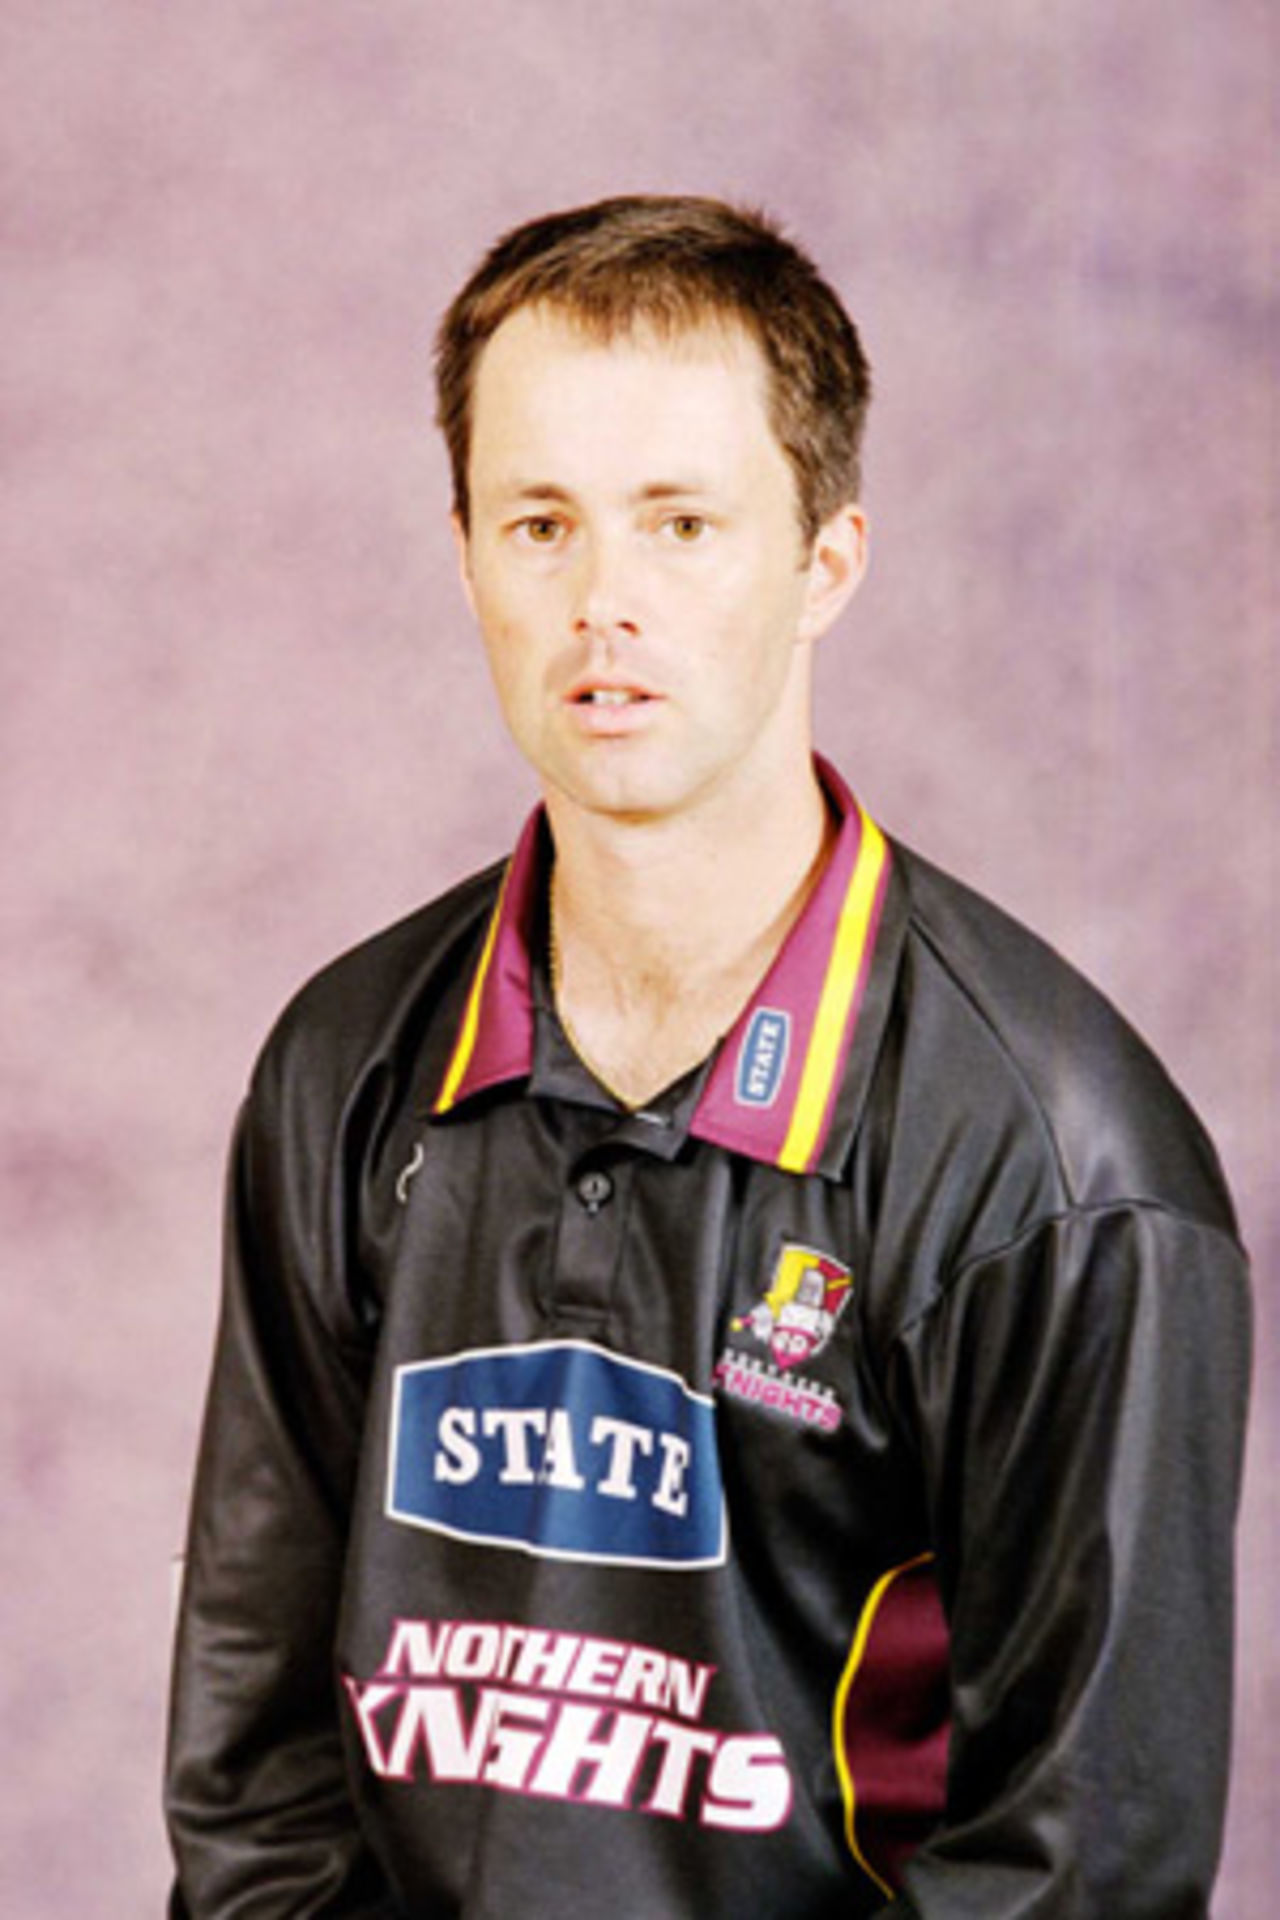 Portrait of Matthew Hart, Northern Districts player in the 2001/02 season.